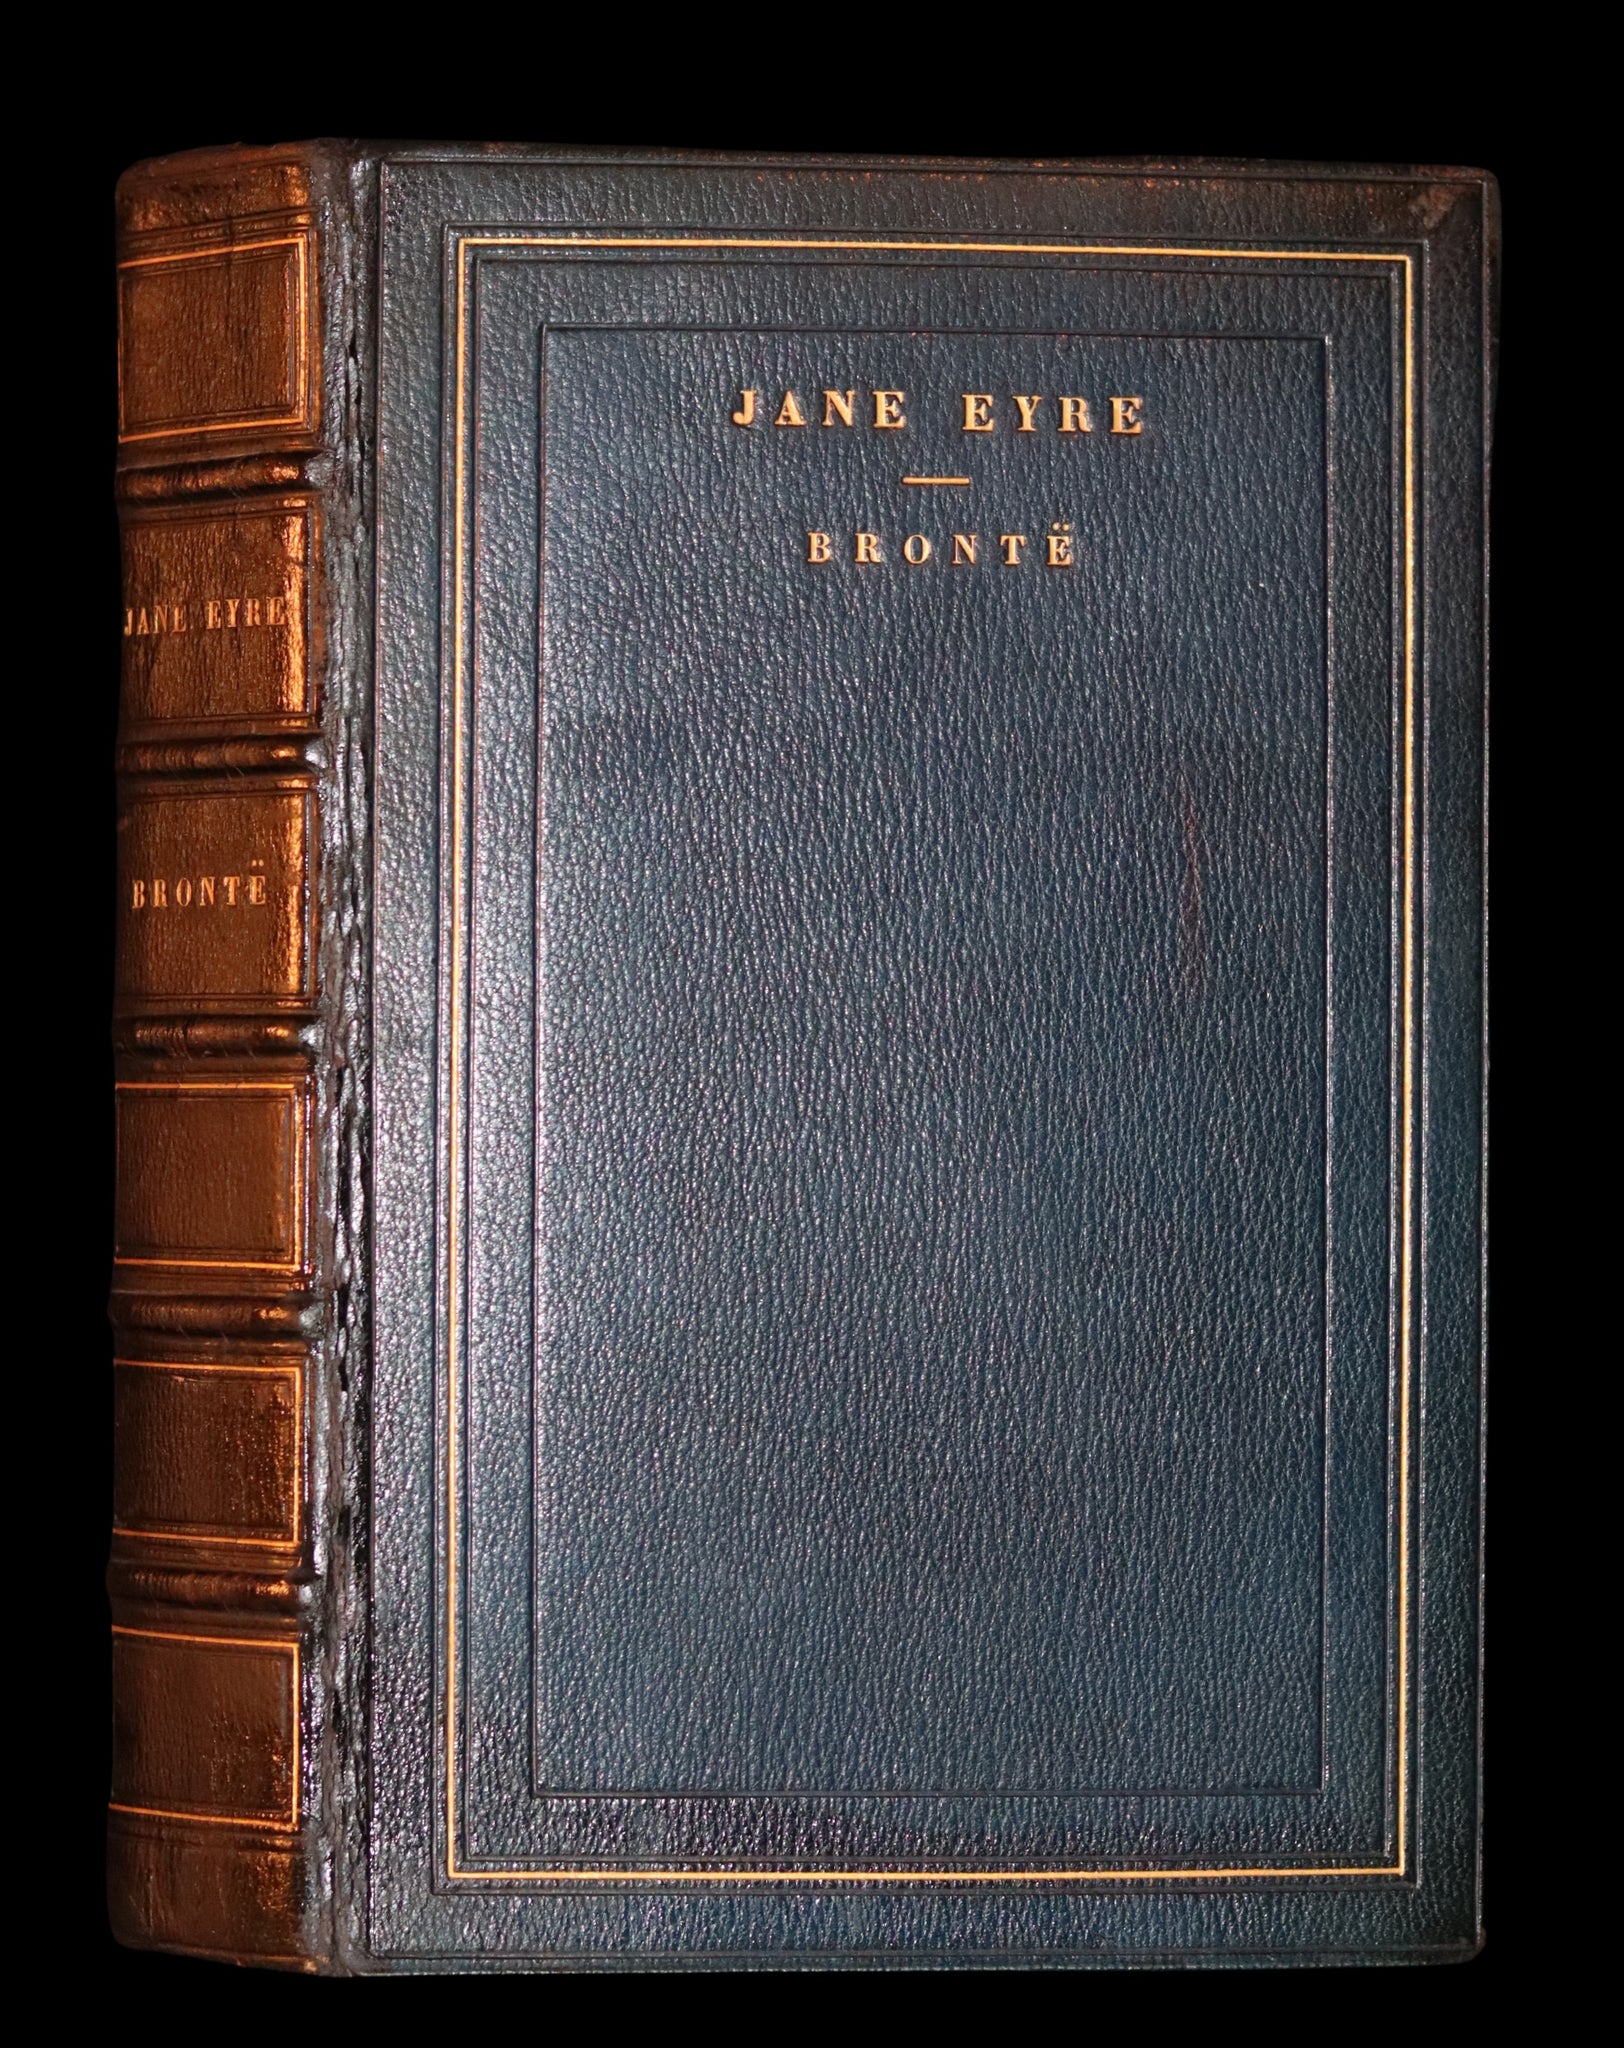 1899 Rare Illustrated Edition - JANE EYRE by CHARLOTTE BRONTË (Currer Bell).